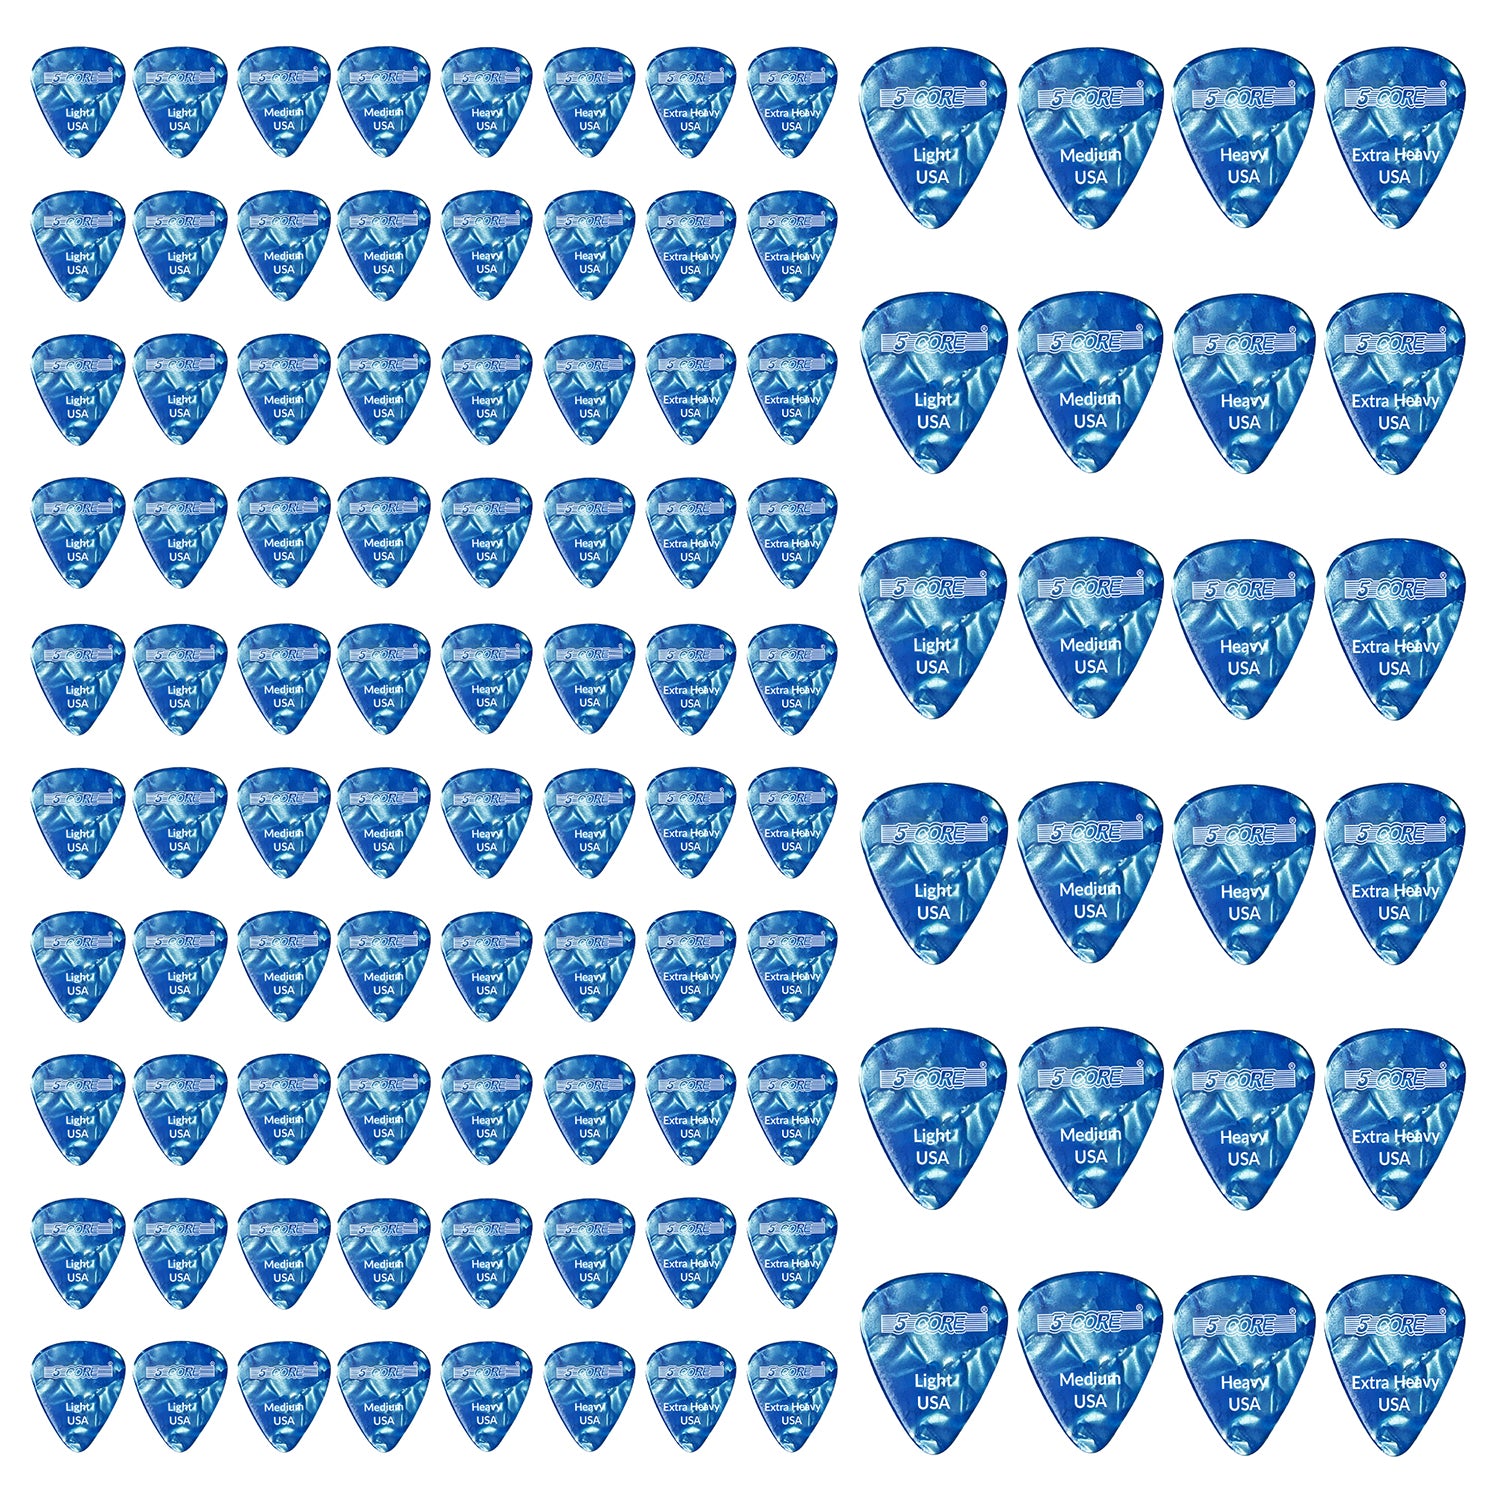 5 Core Guitar Picks 96 Pcs Light Medium Heavy and Extra Heavy Gauge Celluloid Guitar Pick for Acoustic Electric Bass Guitar